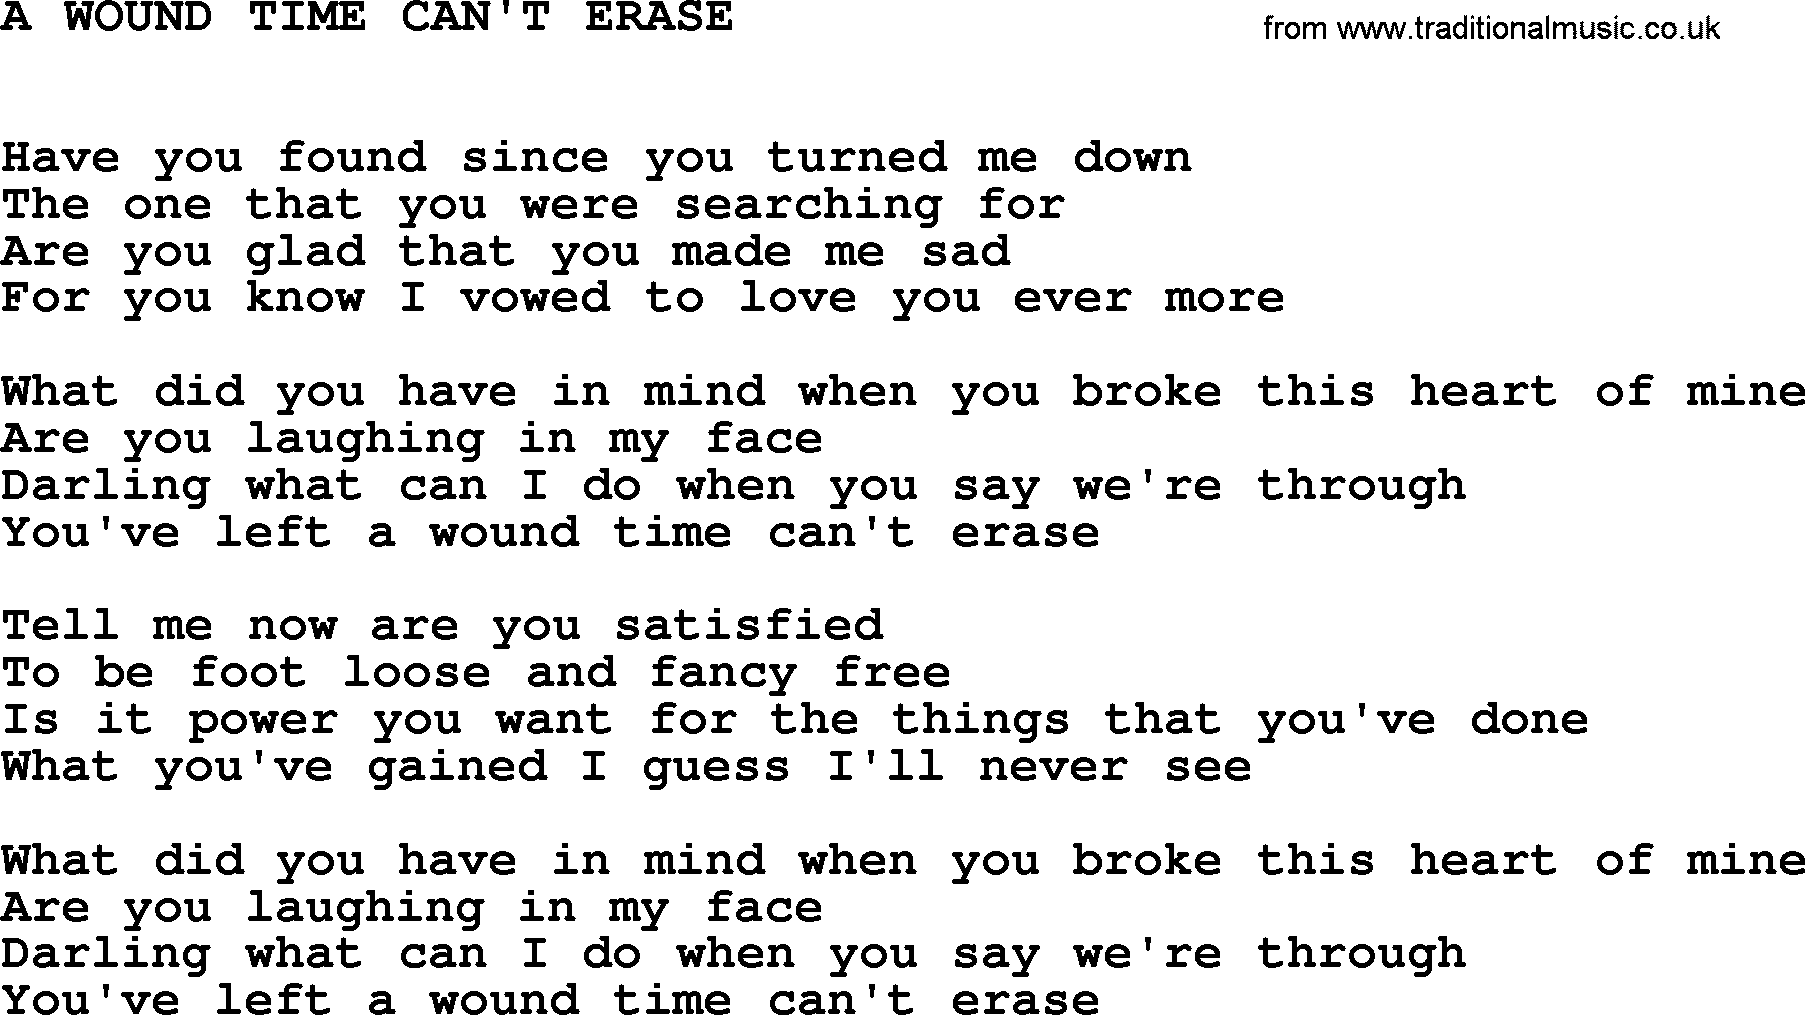 Johnny Cash song A Wound Time Can't Erase.txt lyrics